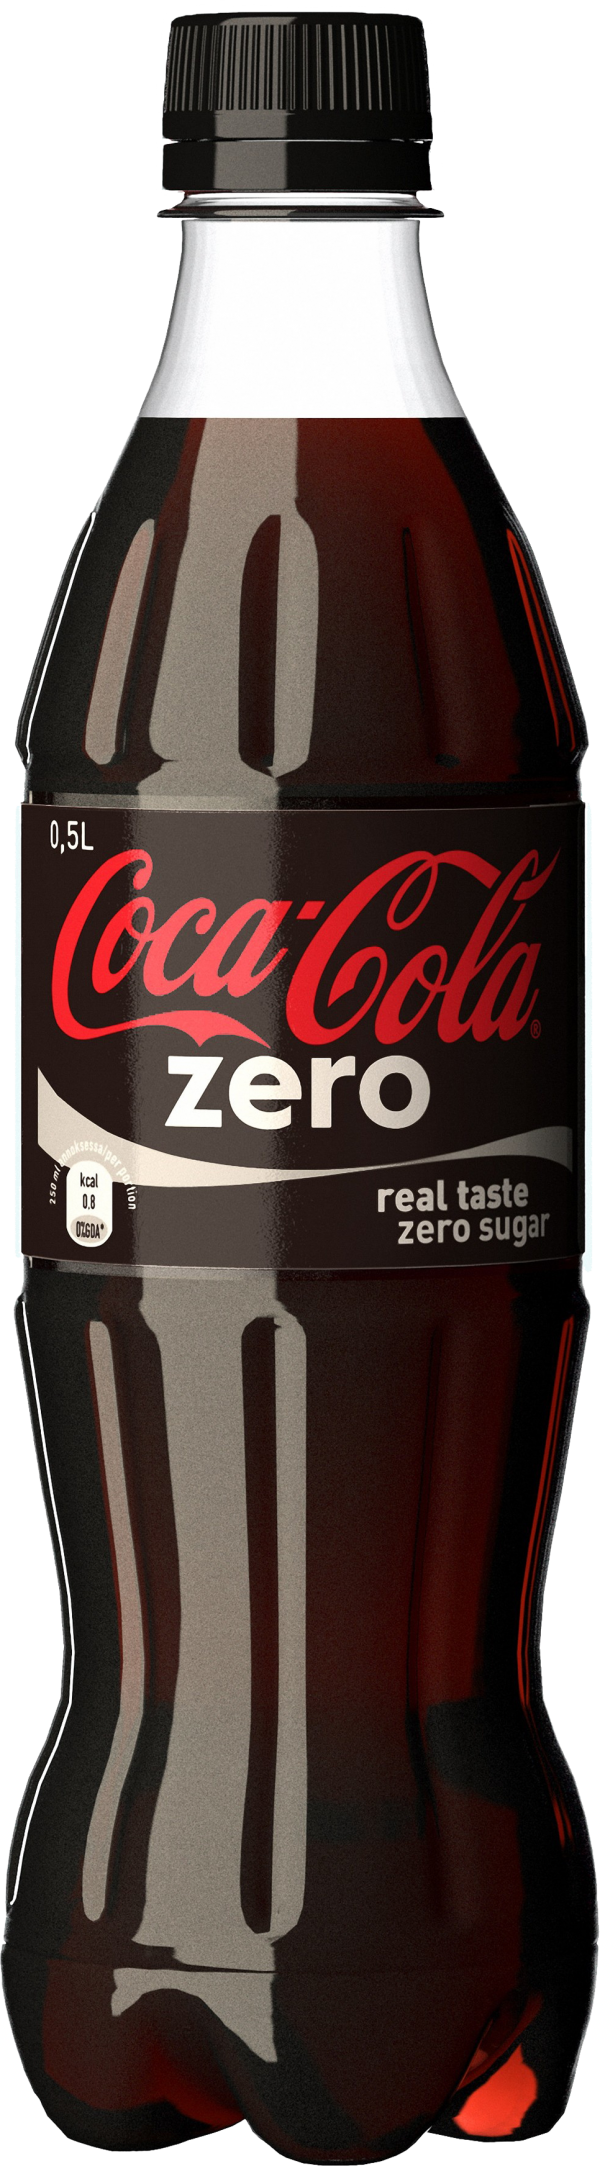 cocacola png free download 9